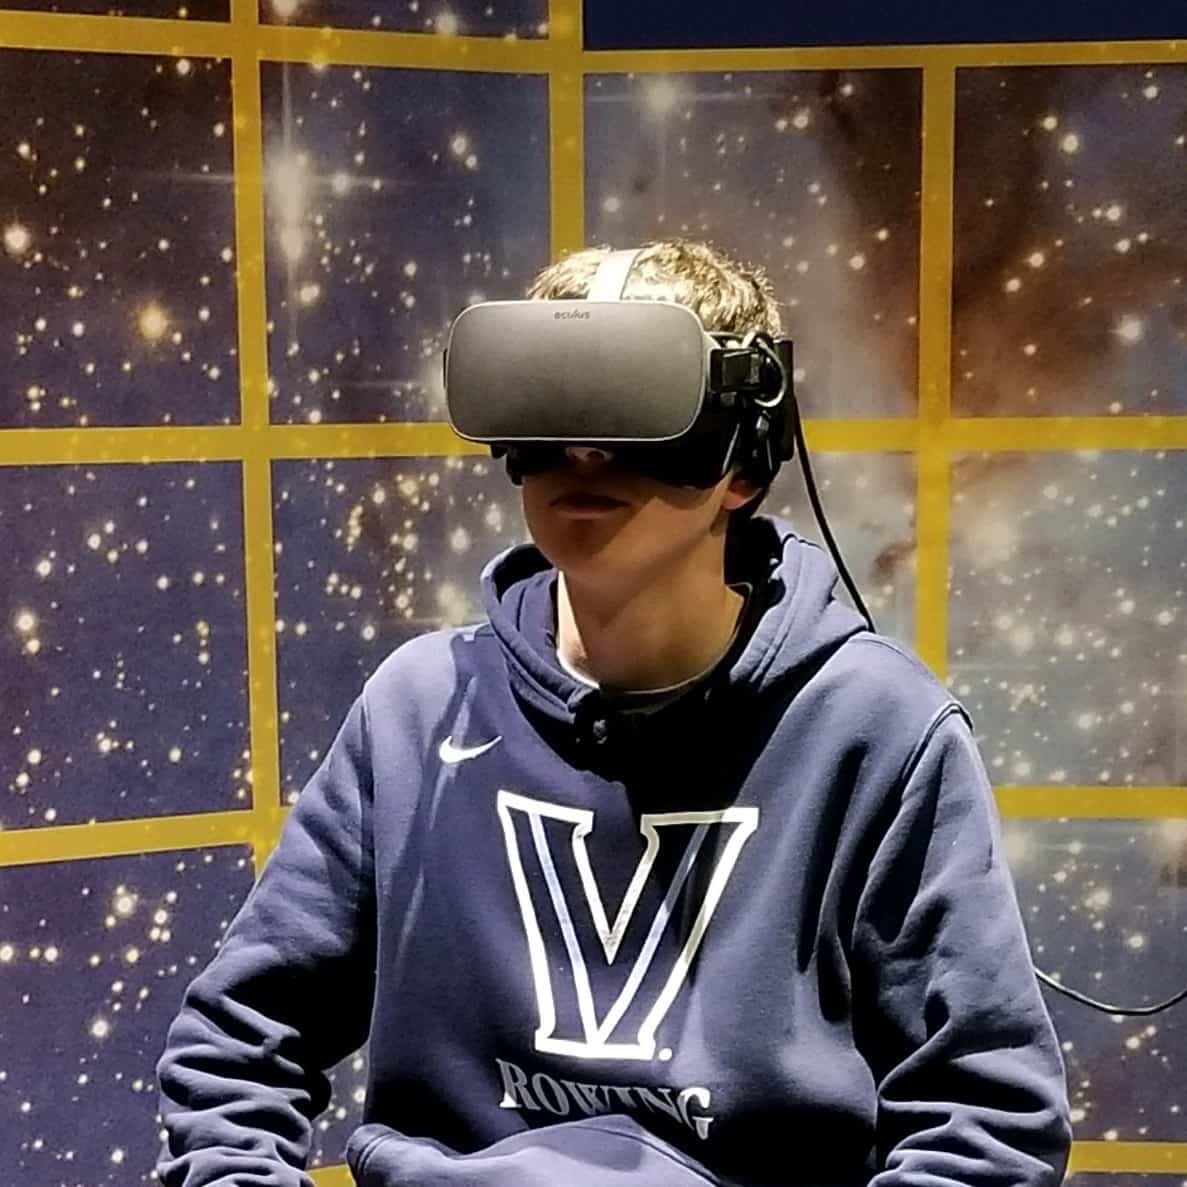 Zach with VR Goggles